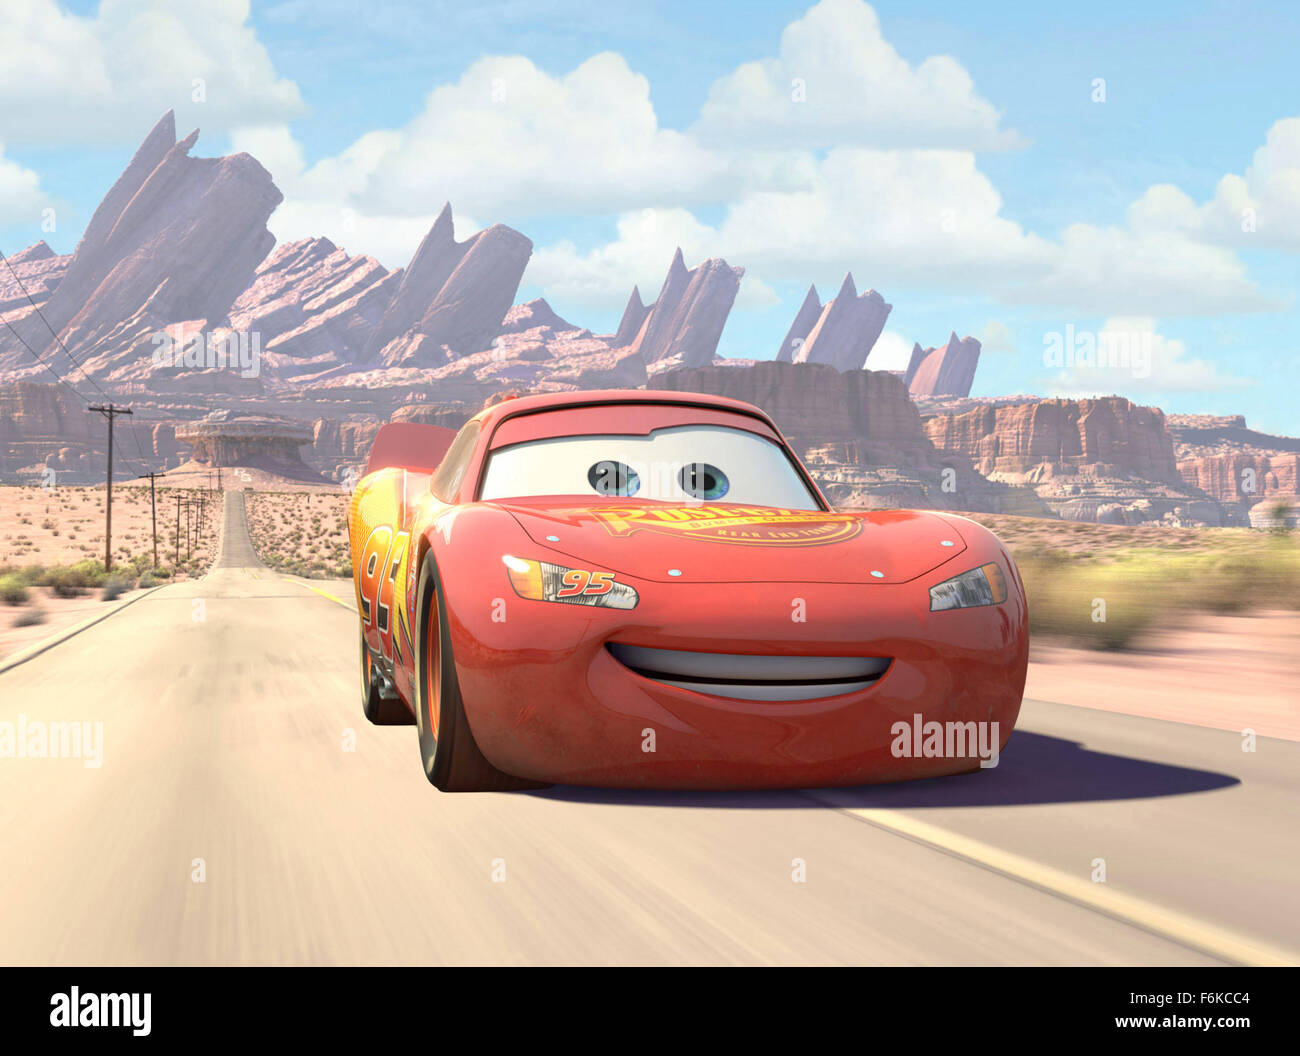 RELEASE DATE: March 14, 2006. MOVIE TITLE: Cars. STUDIO: Walt Disney Pictures, Pixar Animation Studios. PLOT: While traveling to California for the dispute of the final race of the Piston Cup against The King and Chick Hicks, the famous Lightning McQueen accidentally damages the road of the small town Radiator Springs and is sentenced to repair it. Lightning McQueen has to work hard and finds friendship and love in the simple locals, changing its values during his stay in the small town and becoming a true winner. PICTURED: . Stock Photo